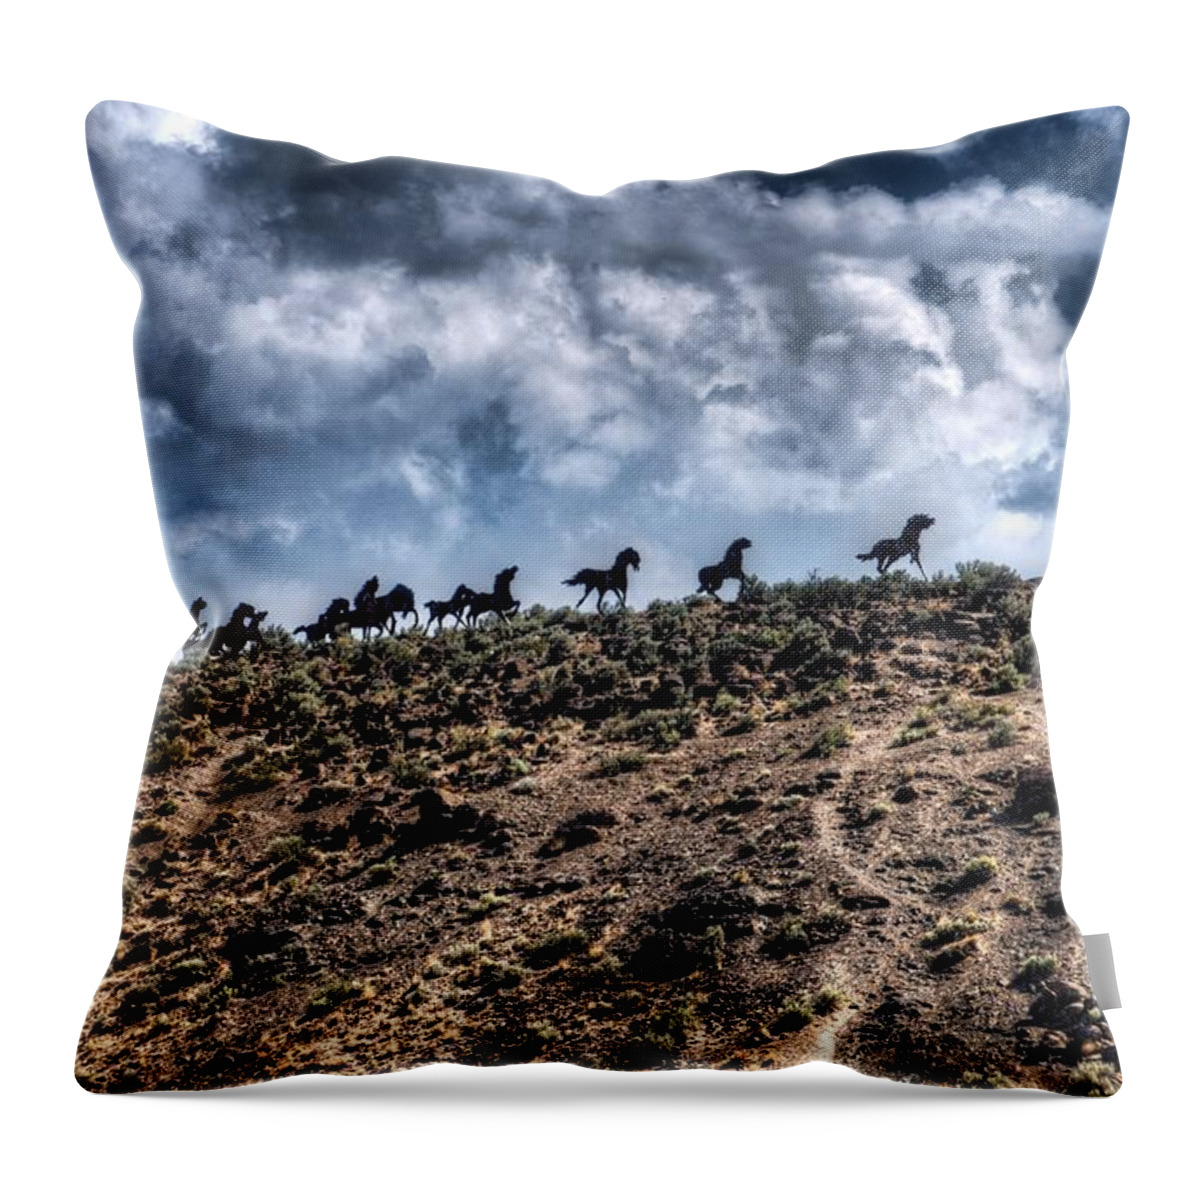 Horse Throw Pillow featuring the photograph Wild Horses Monument by Spencer McDonald